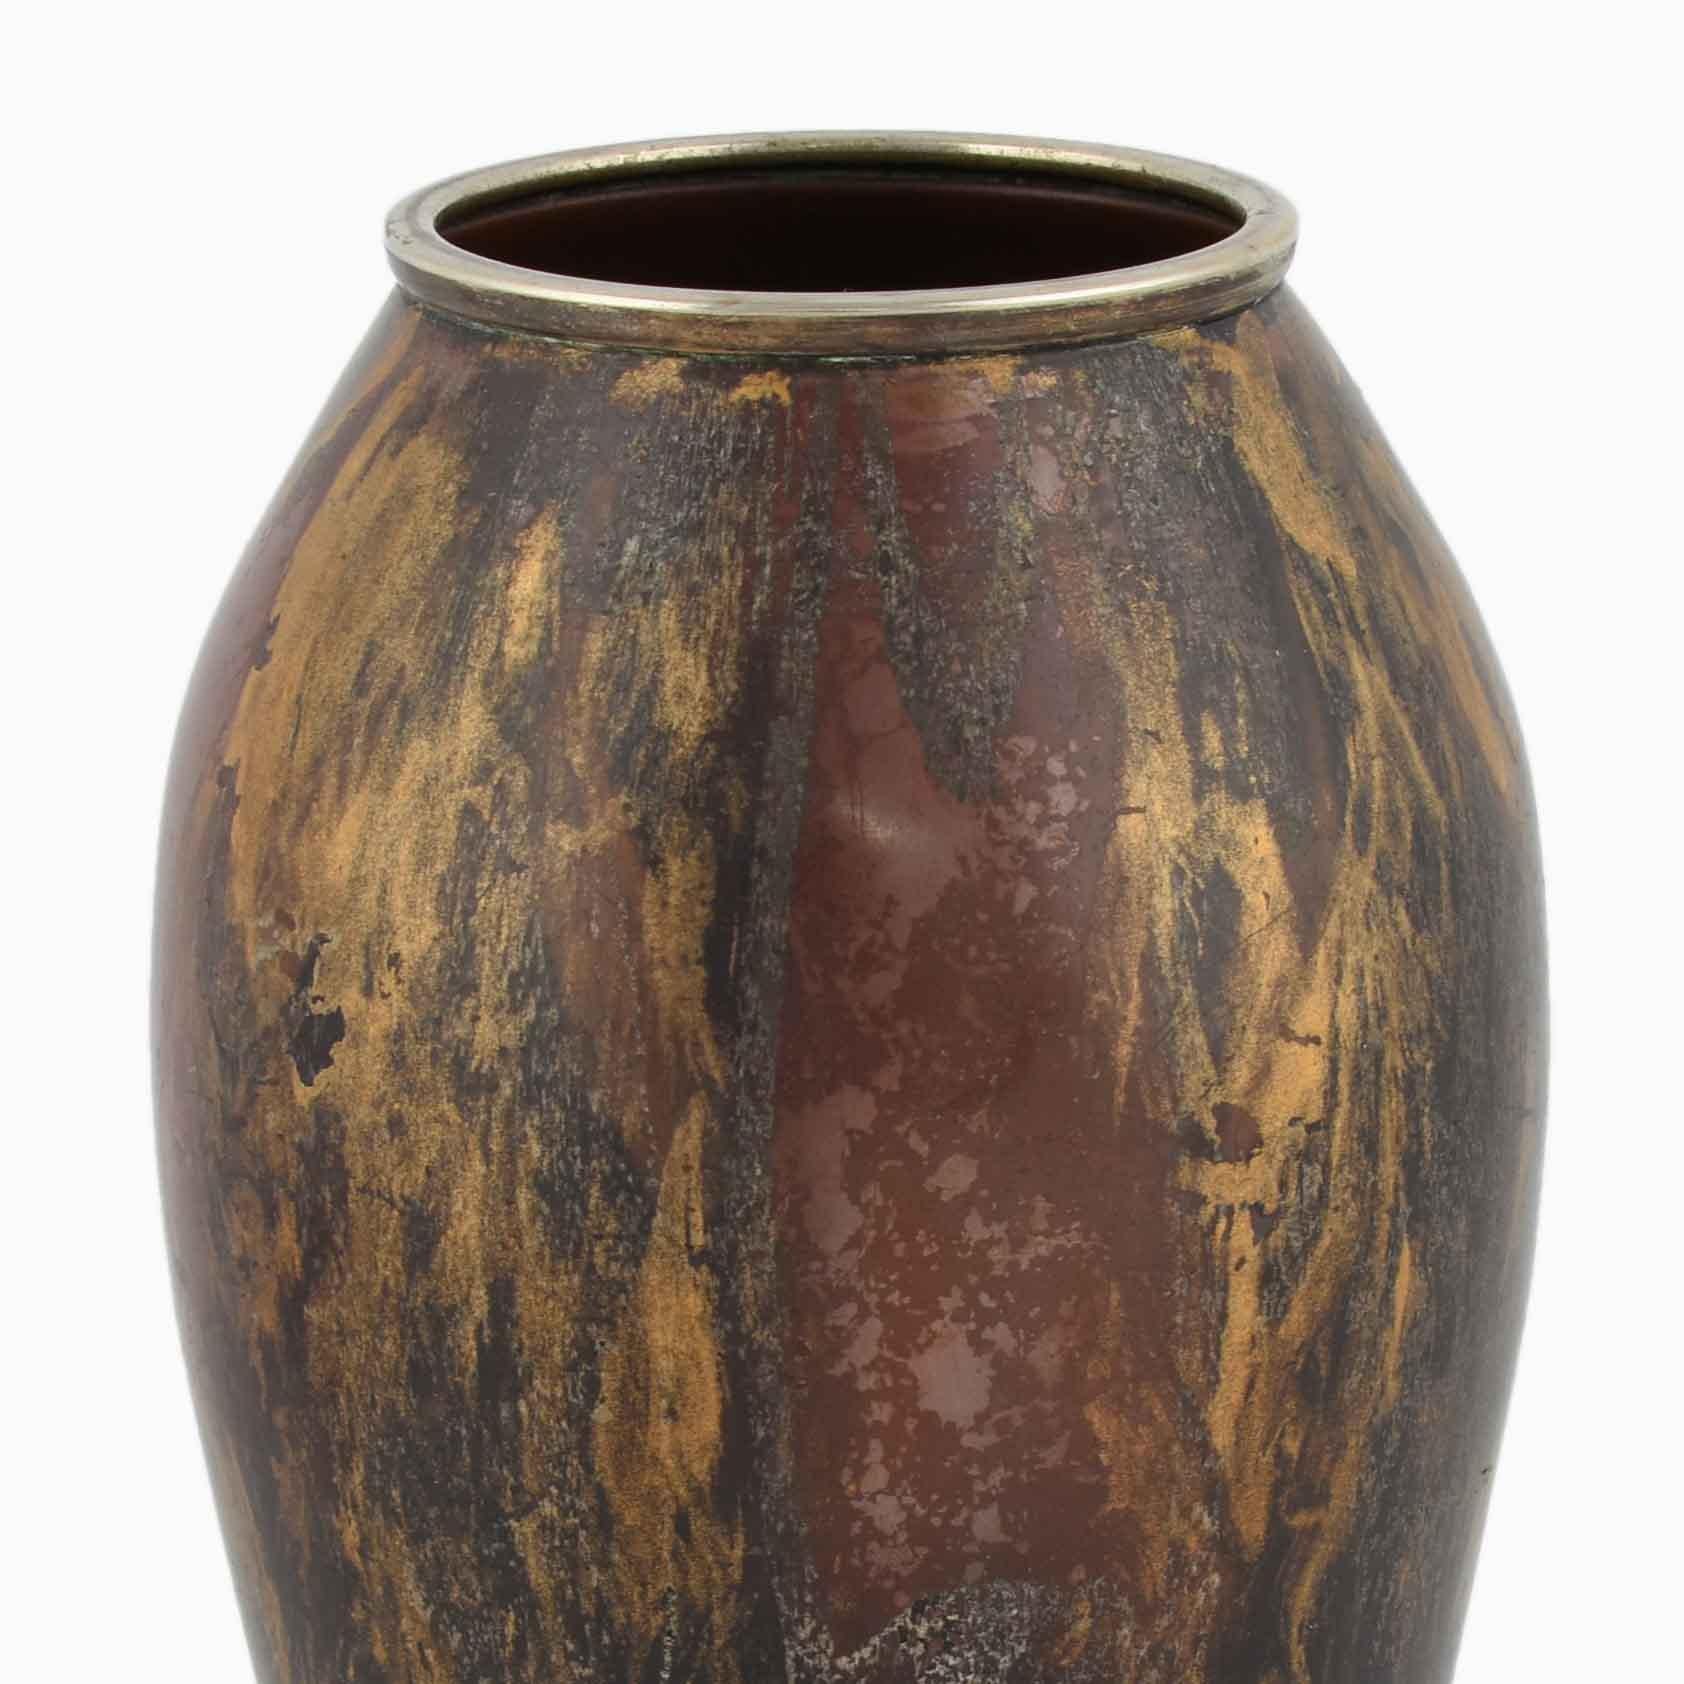 Vintage Art Deco vase is a beautiful and rare original decorative object realized between the 1920s and the 1930s, in a limited numbered edition. 

Original copper carved with sponging decoration in silver and gold. 

Realized probably by